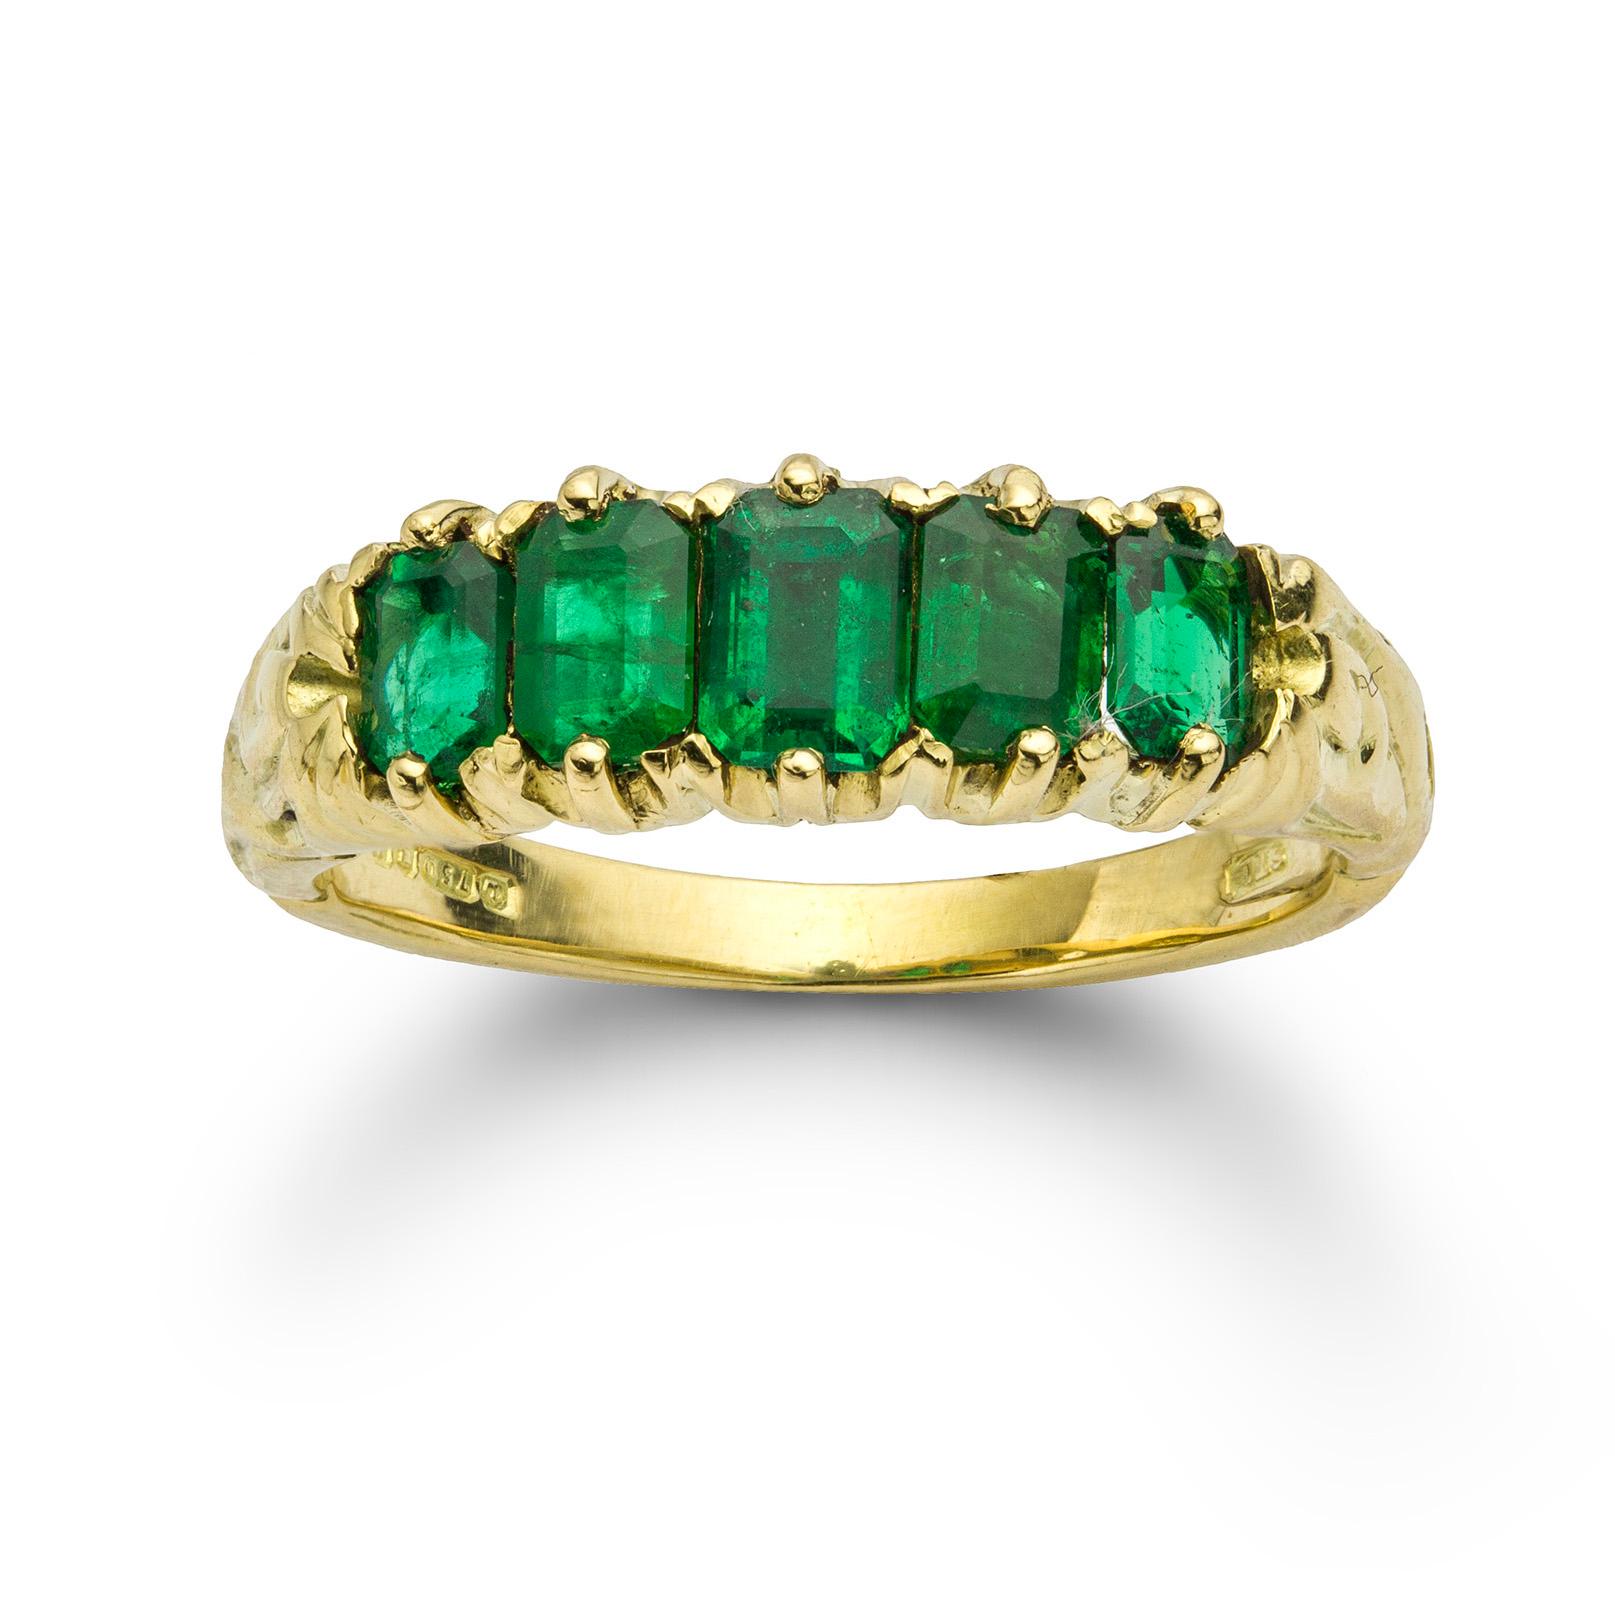 An antique five stone emerald ring, the five octagonal-cut emeralds weighing 1.1 carats in total, claw-set in yellow gold mount with carved shoulders, hallmarked 18ct gold, London, 1998, measuring 2 x 0.6cm, finger size M, gross weight 4.9